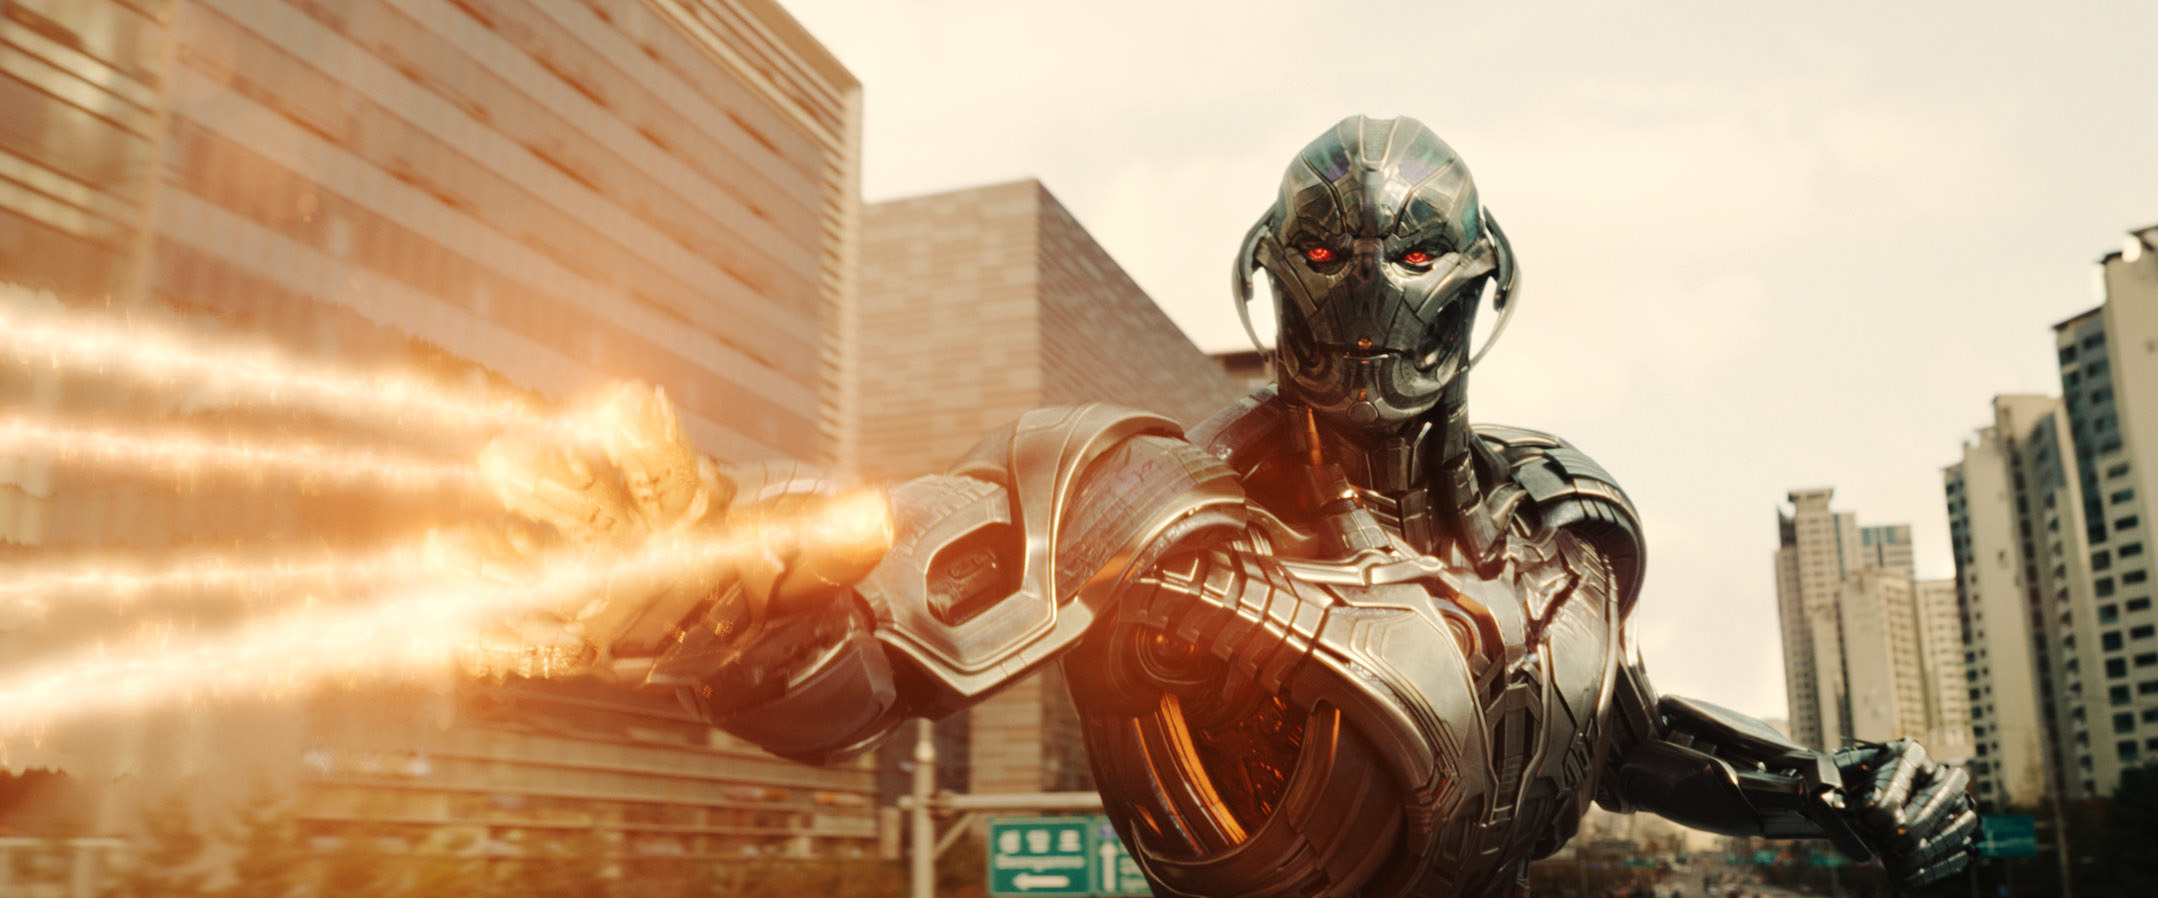 Ultron from &quot;Avengers: Age of Ultron&quot;